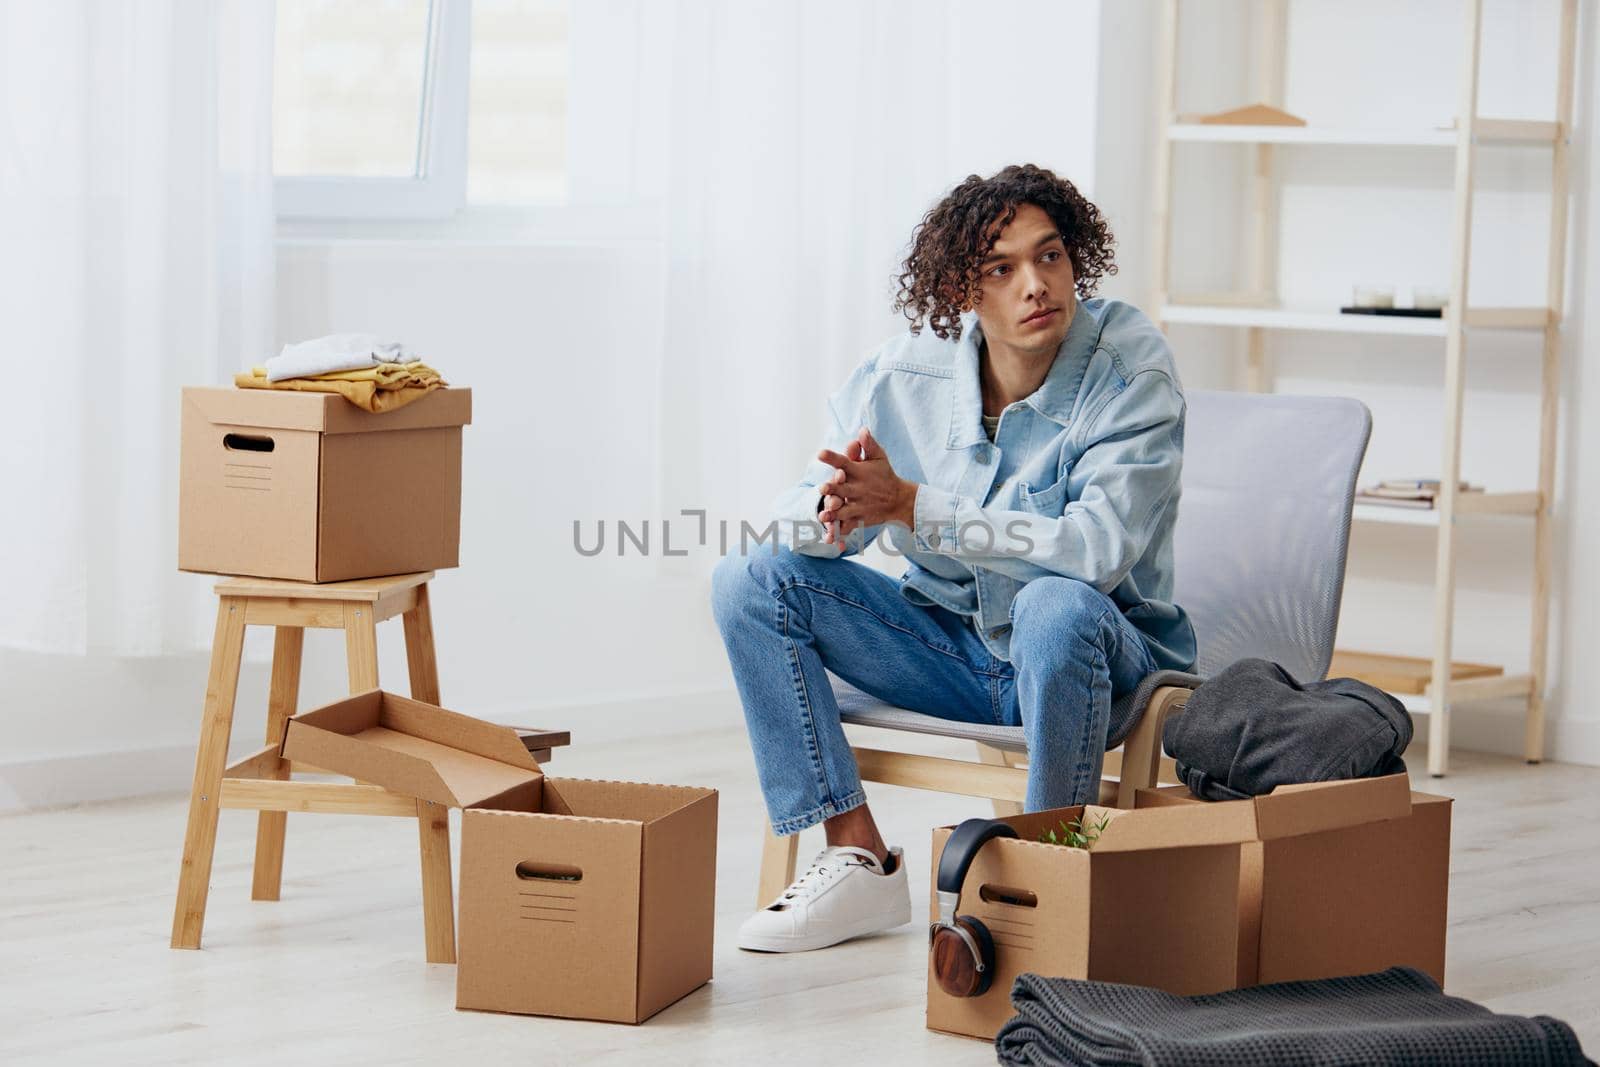 A young man unpacking things from boxes in the room interior. High quality photo